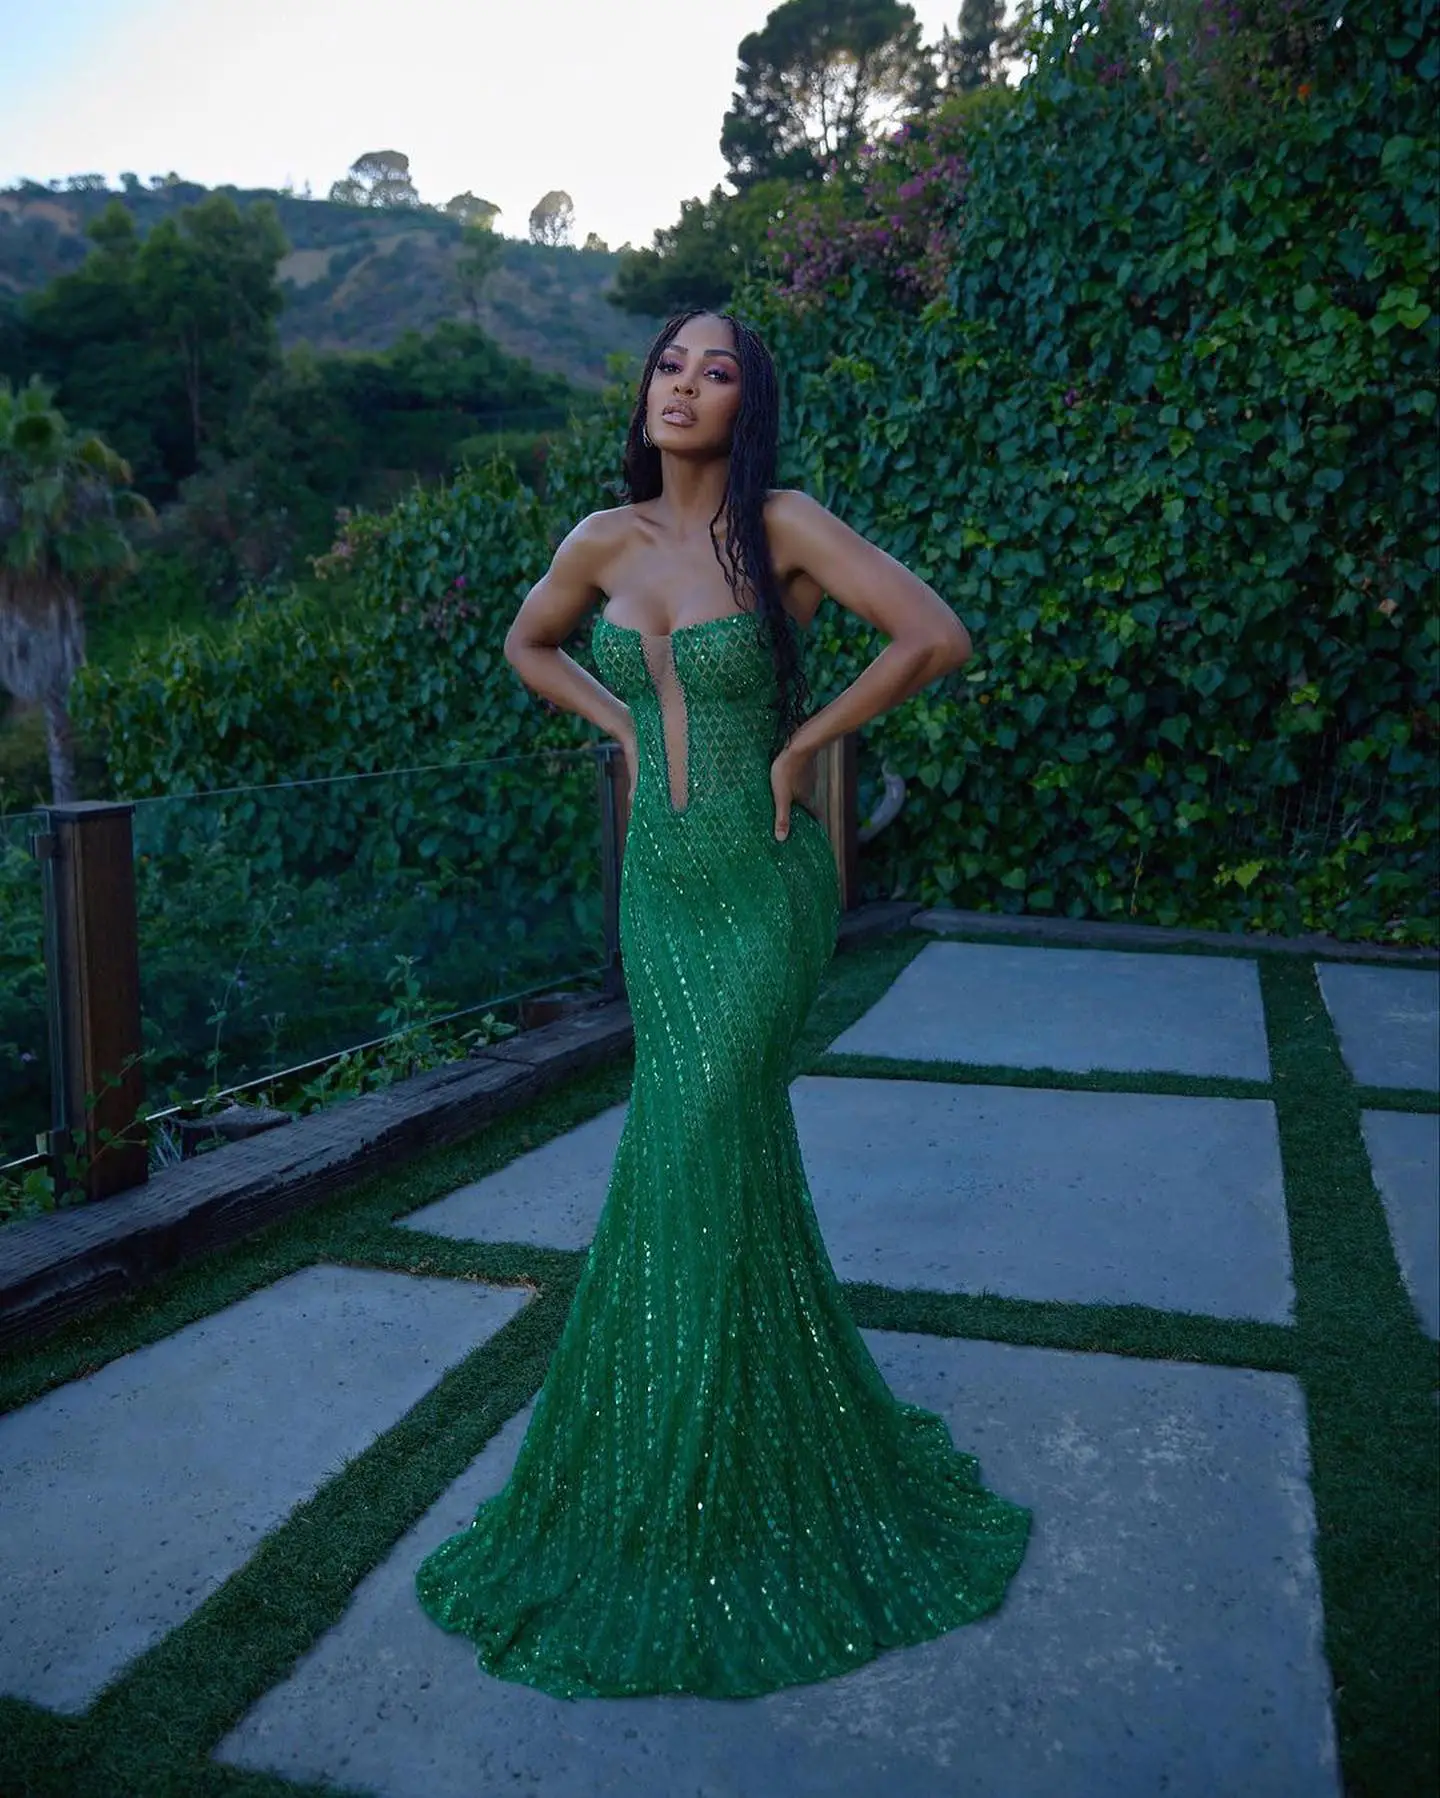 #MeaganGood posed in a #GaliaLahav gown, styled by @philippeuter for her birthda